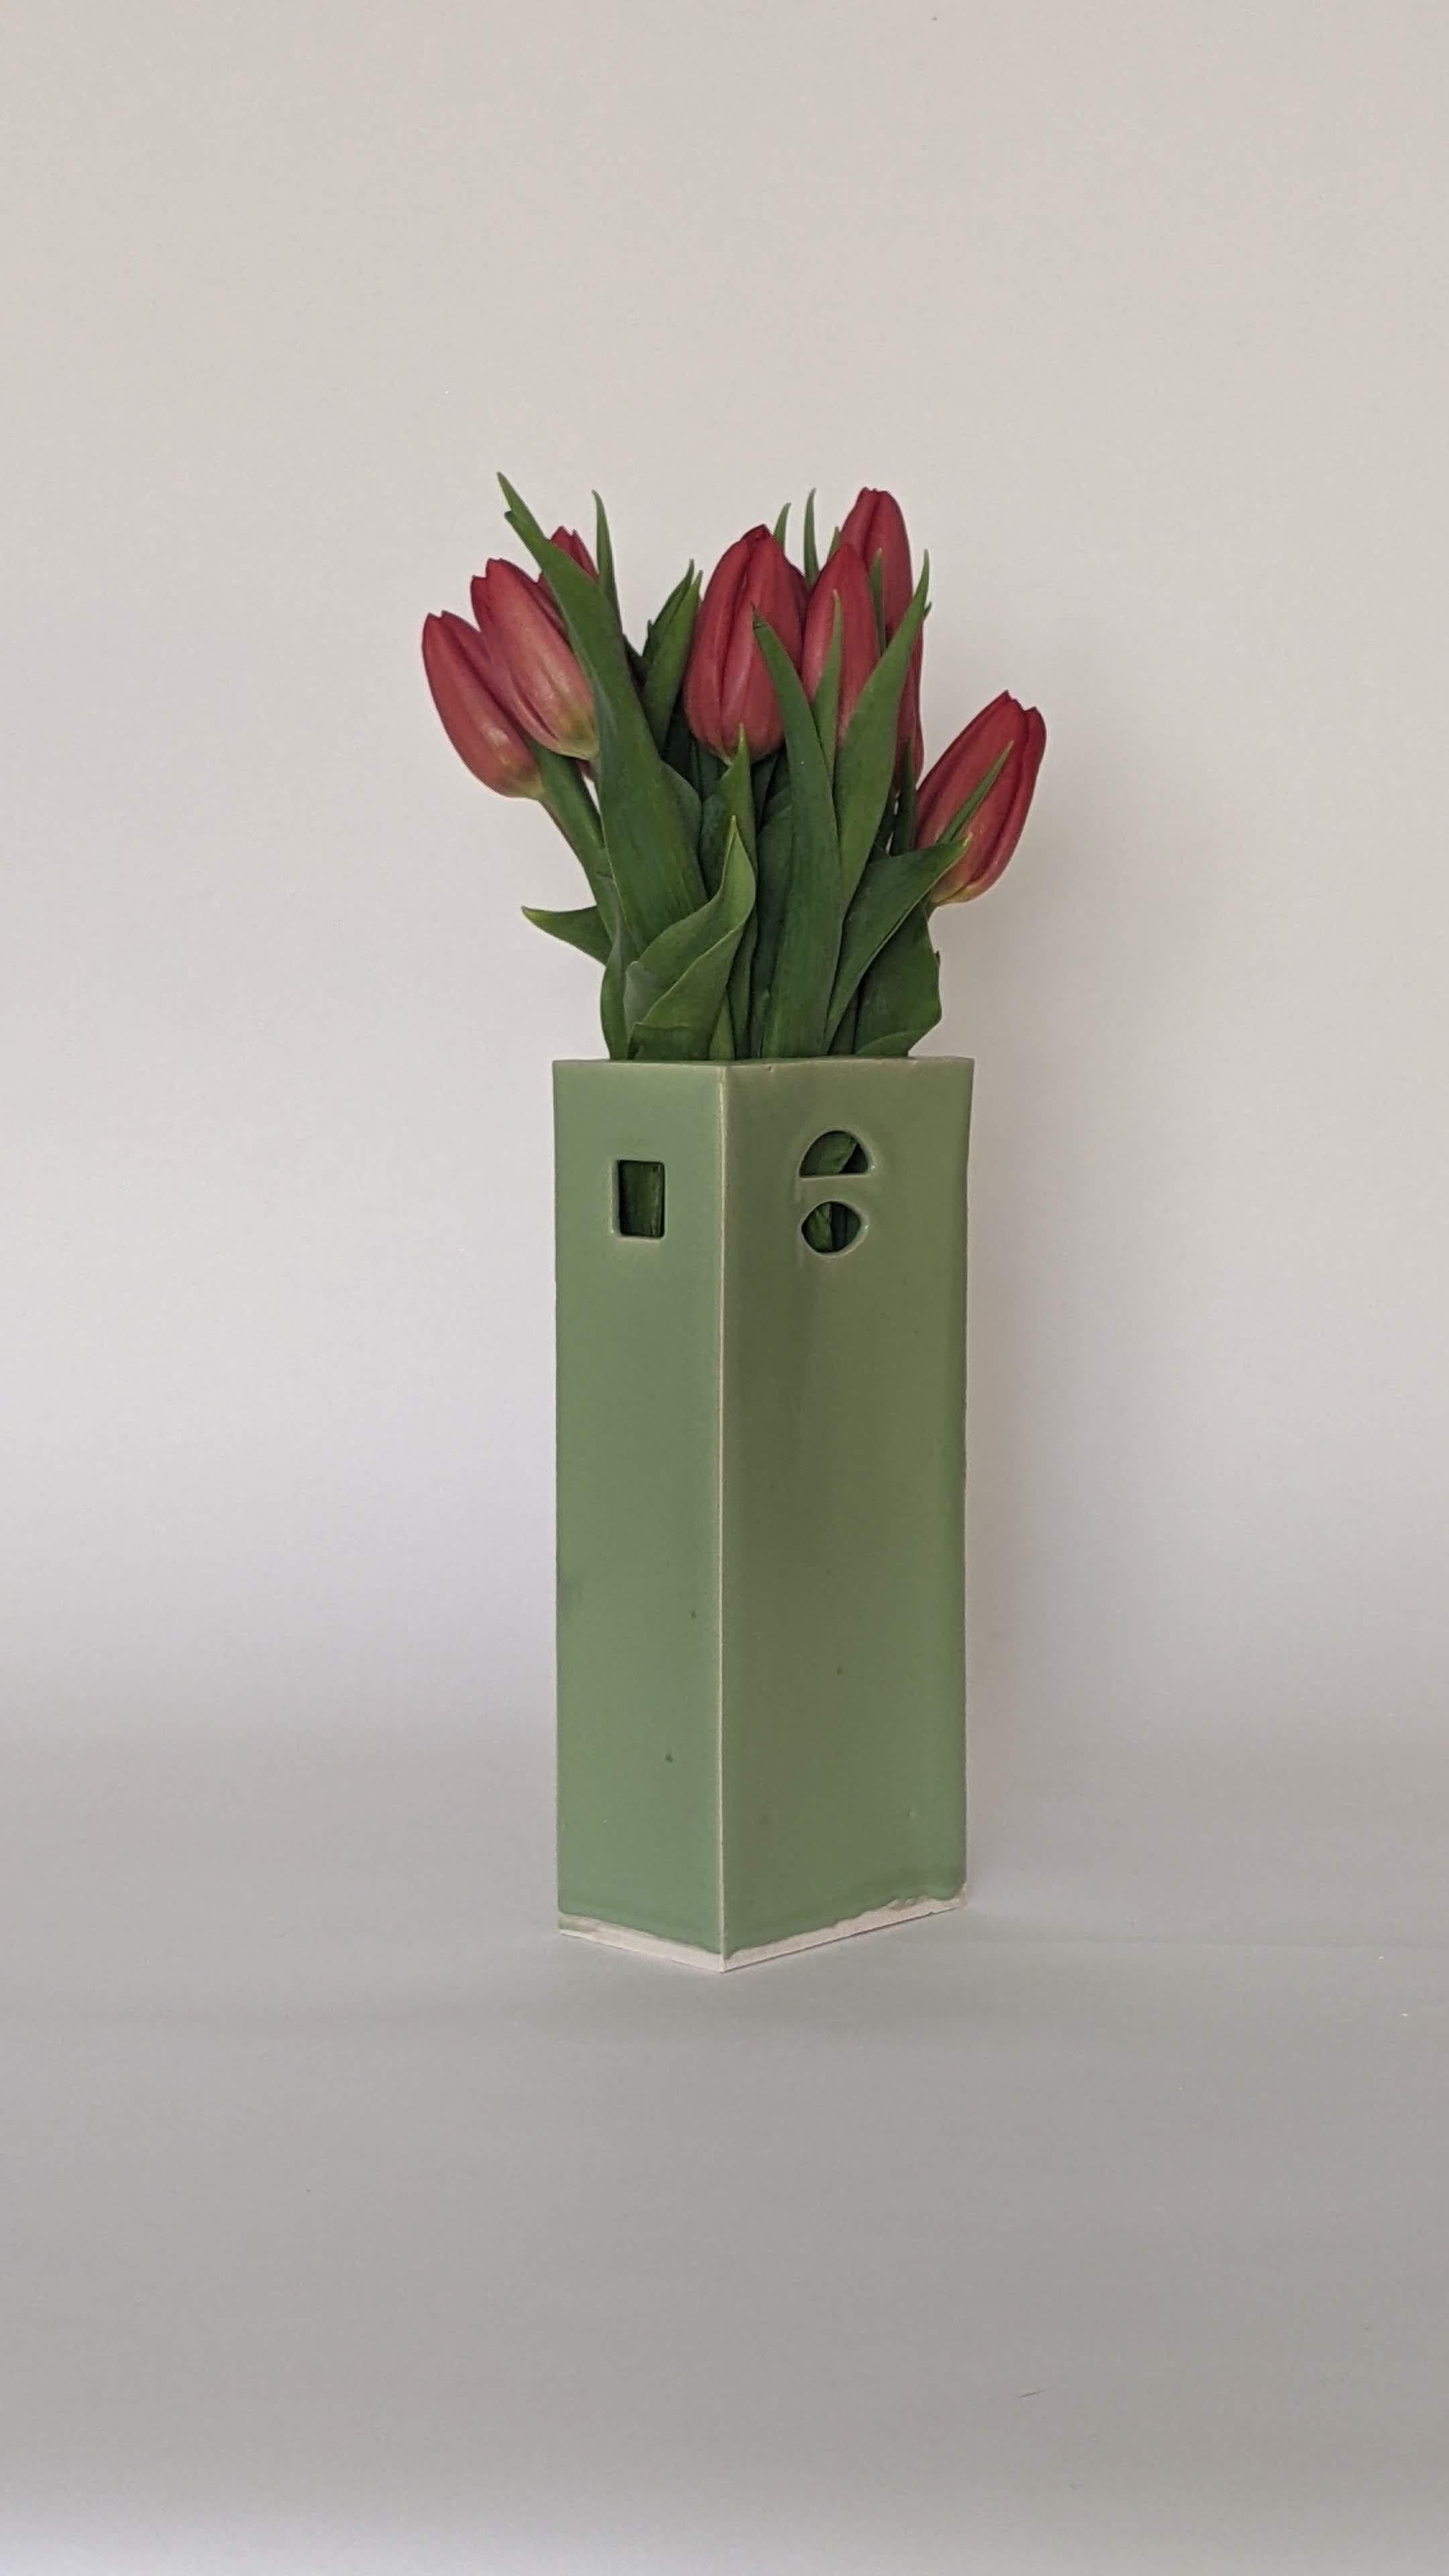 This unique Green Hand-crafted Ceramic Vase is a meticulously crafted glazed ceramic vase skillfully handcrafted by James Hicks. The design features a sleek modern rectangle hollow brick form with openings inspired by the architectural elements of